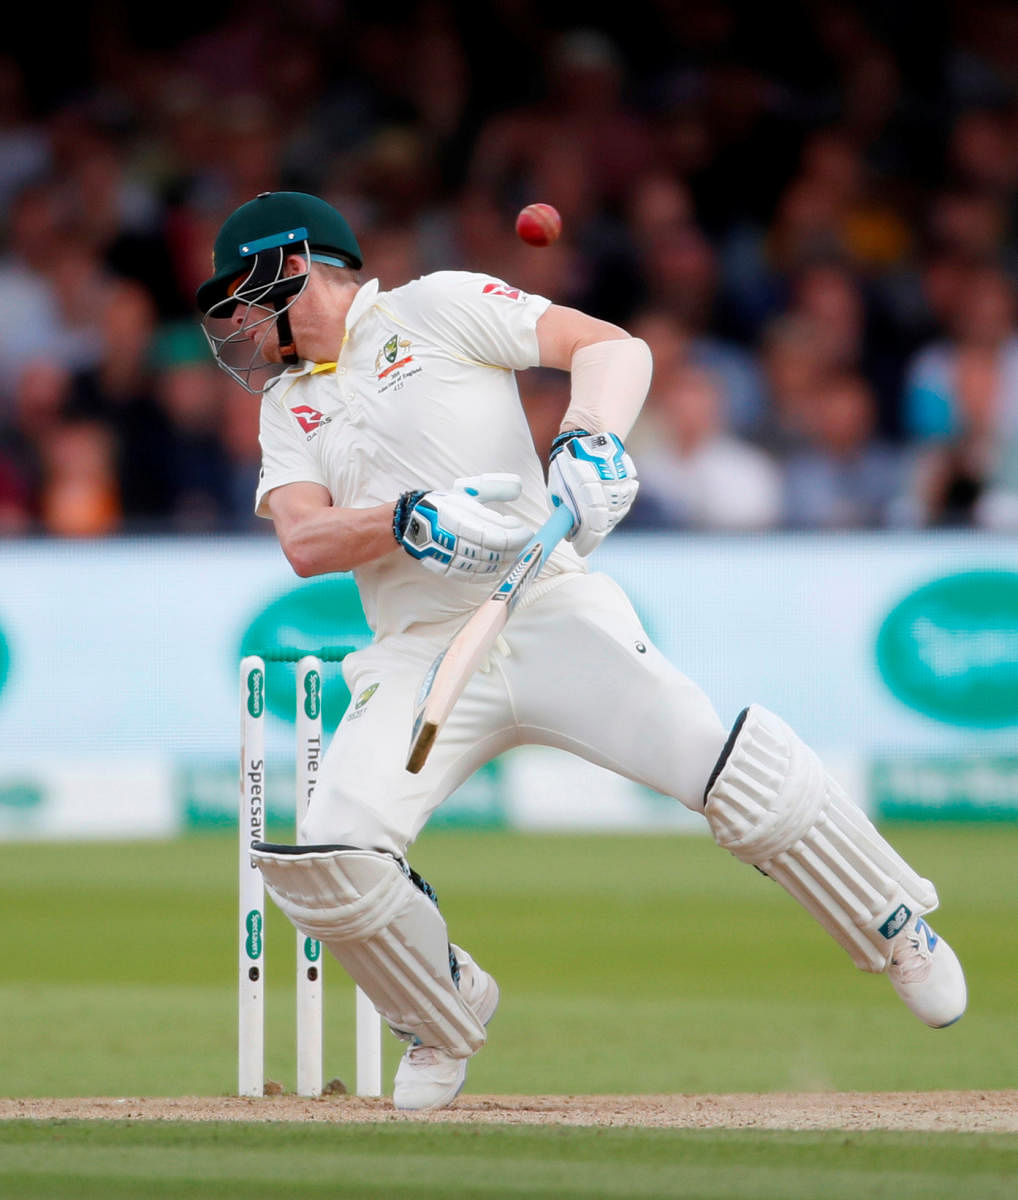 Australia’s Steve Smith became the first player to be replaced under the new concussion substitute rule after the right-hander was hit below his left ear by a Jofra Archer bouncer in the second Ashes Test. reuters